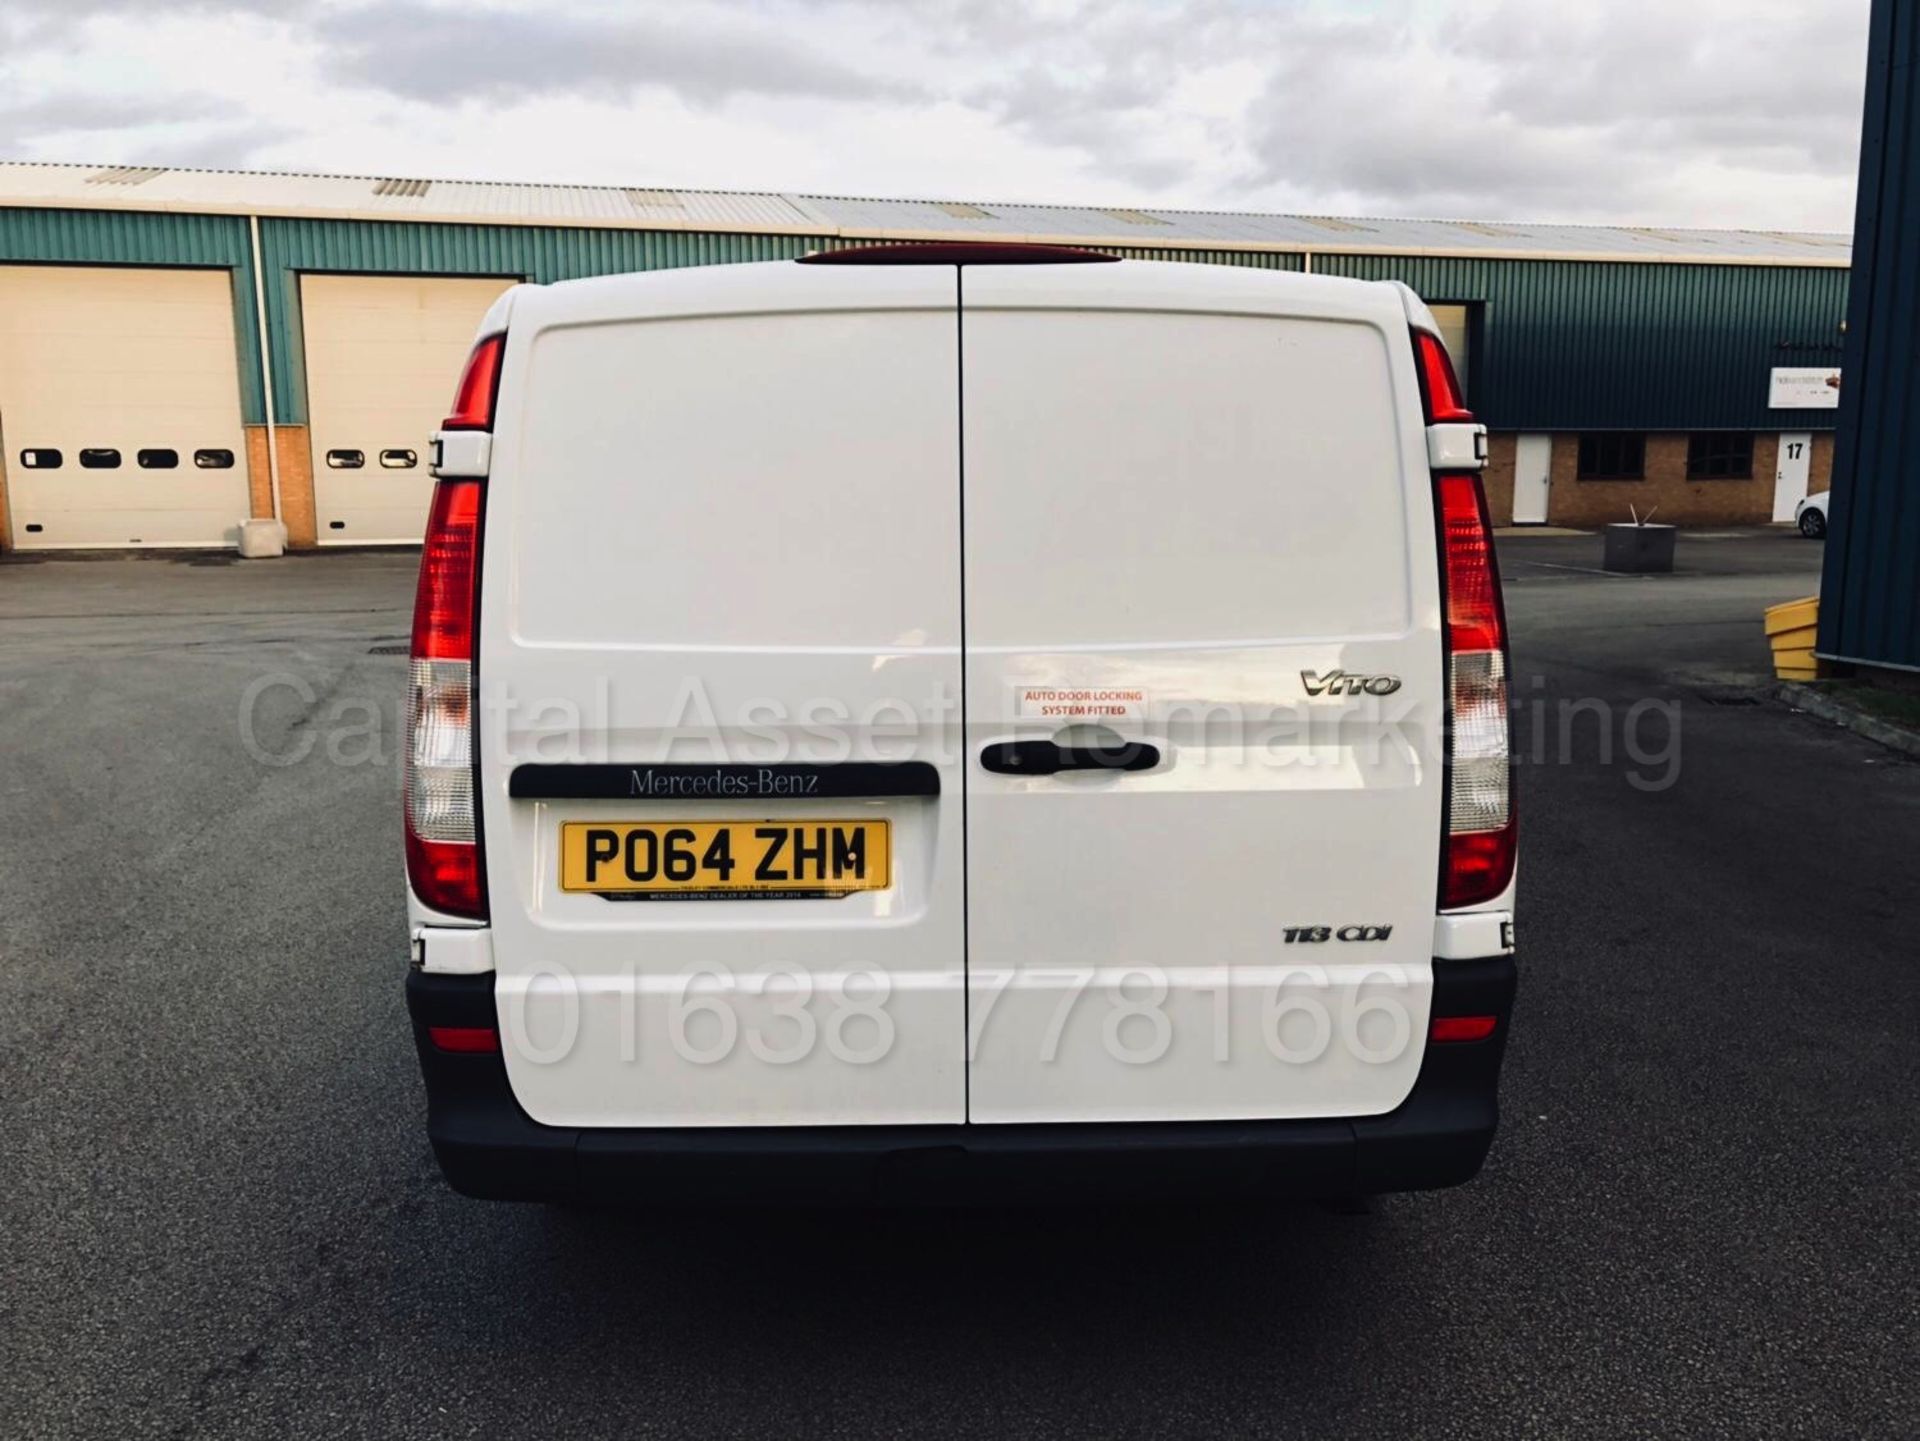 MERCEDES VITO 113CDI LWB (2015 MODEL - NEW SHAPE) 1 OWNER - LOW MILES - ELEC PACK - 130BHP - 6 SPEED - Image 6 of 30